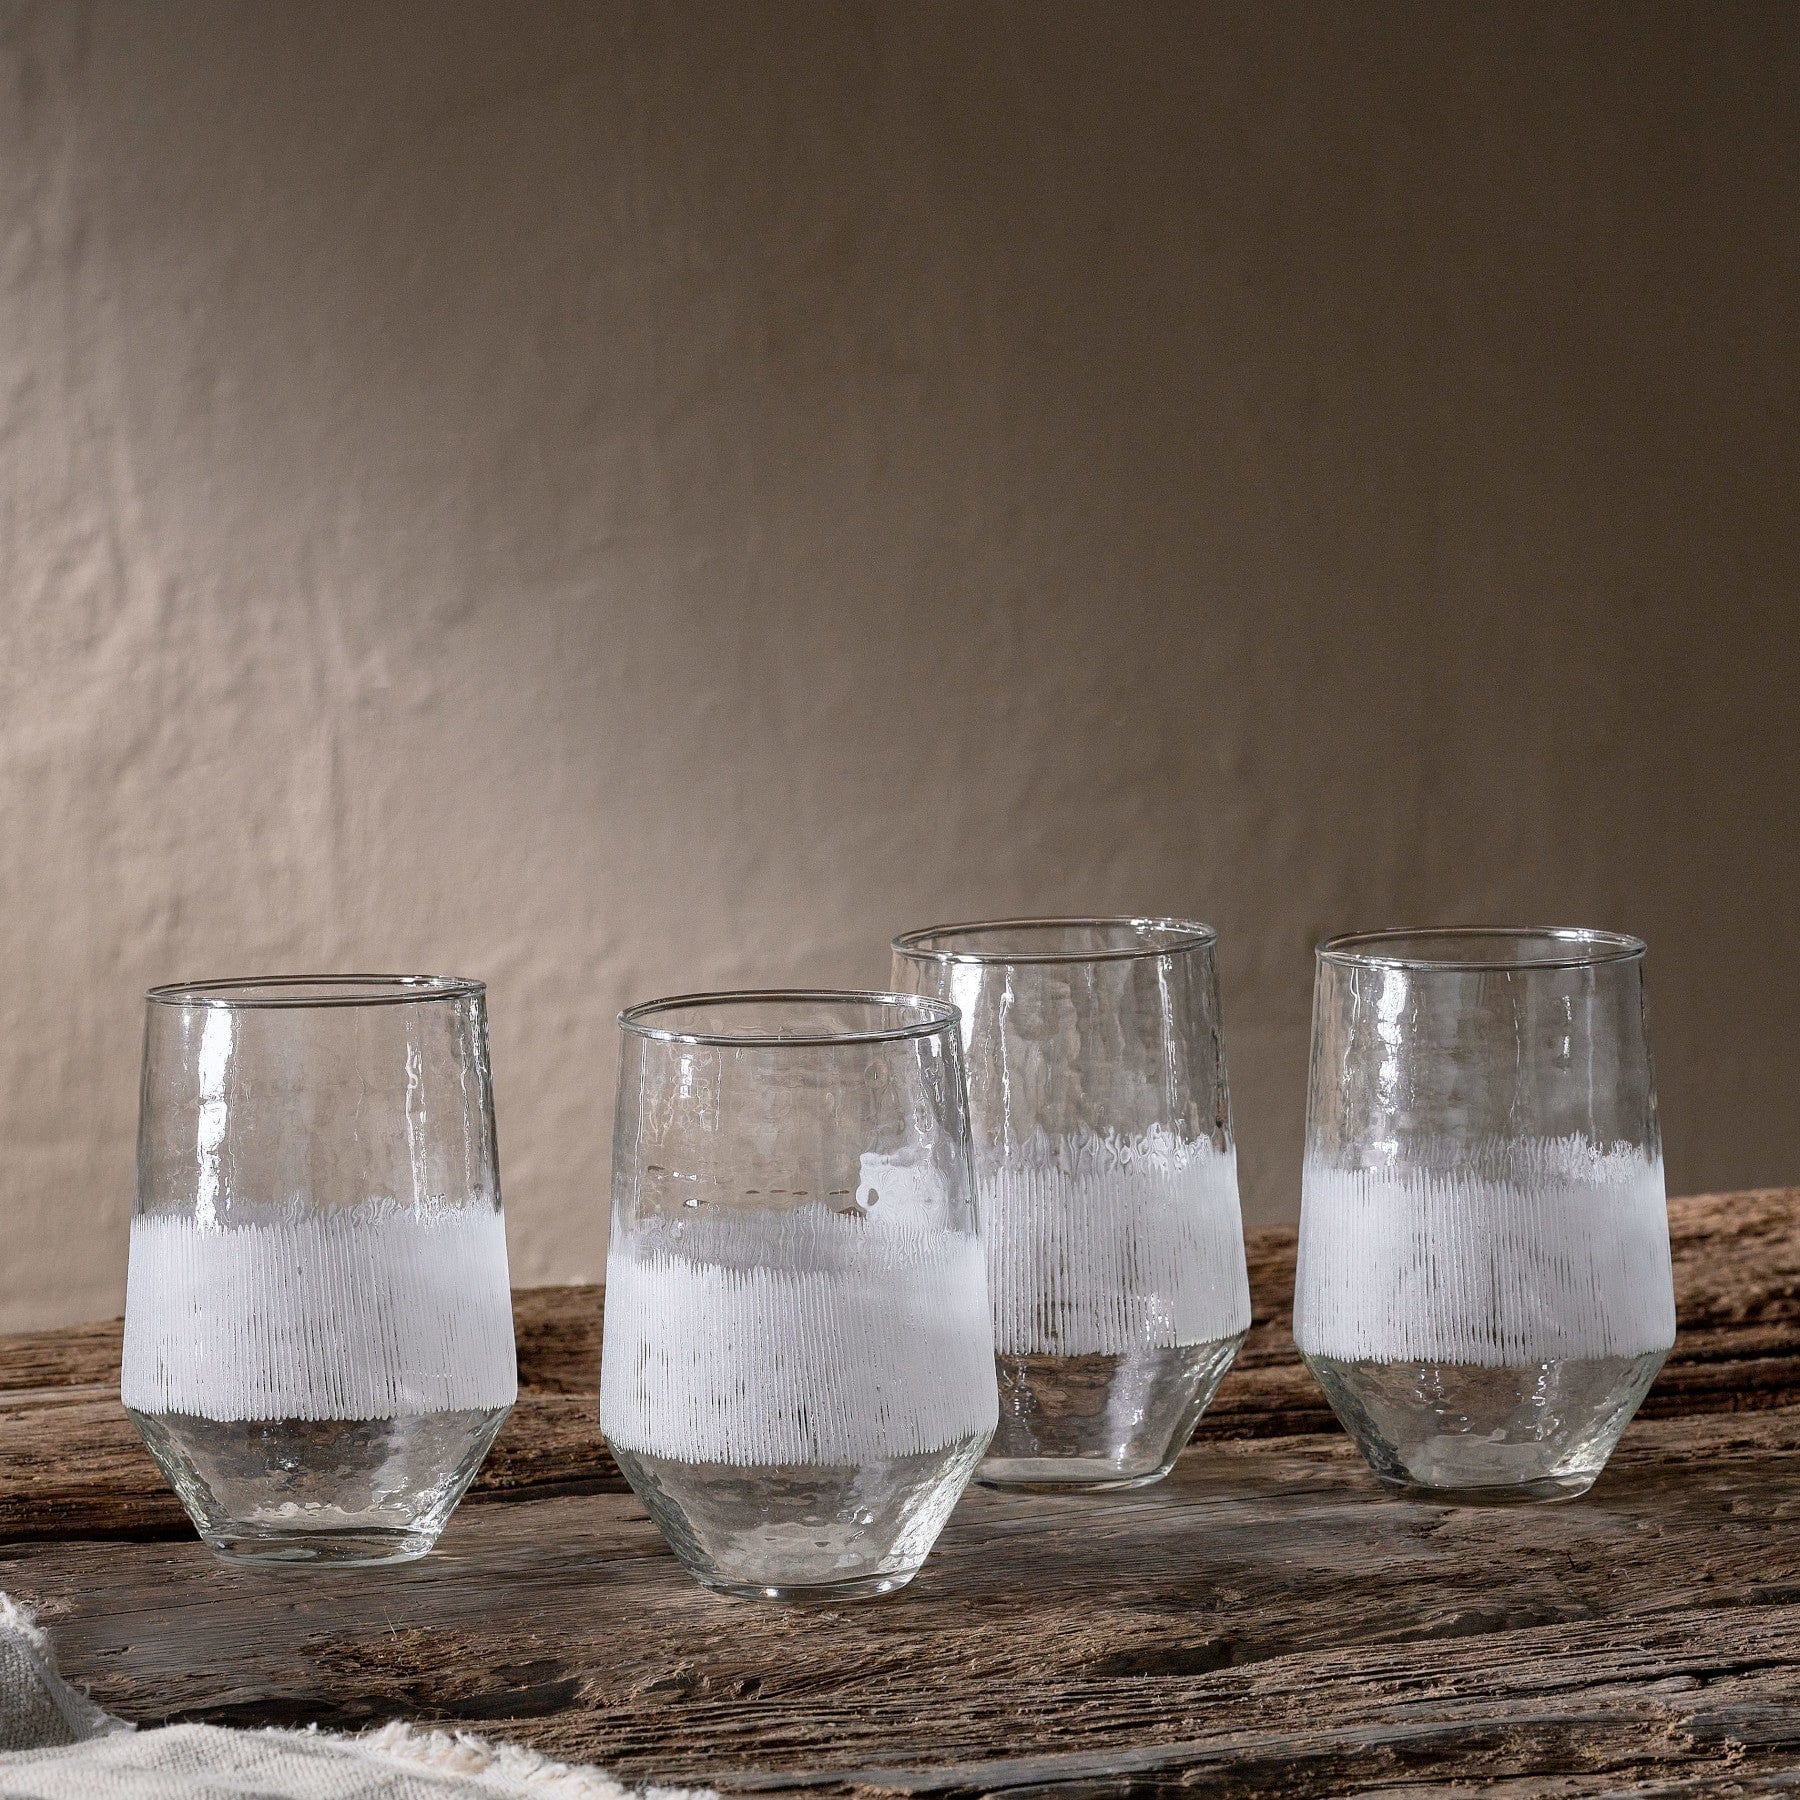 Water glasses with condensation on rustic wooden table against textured gray background.